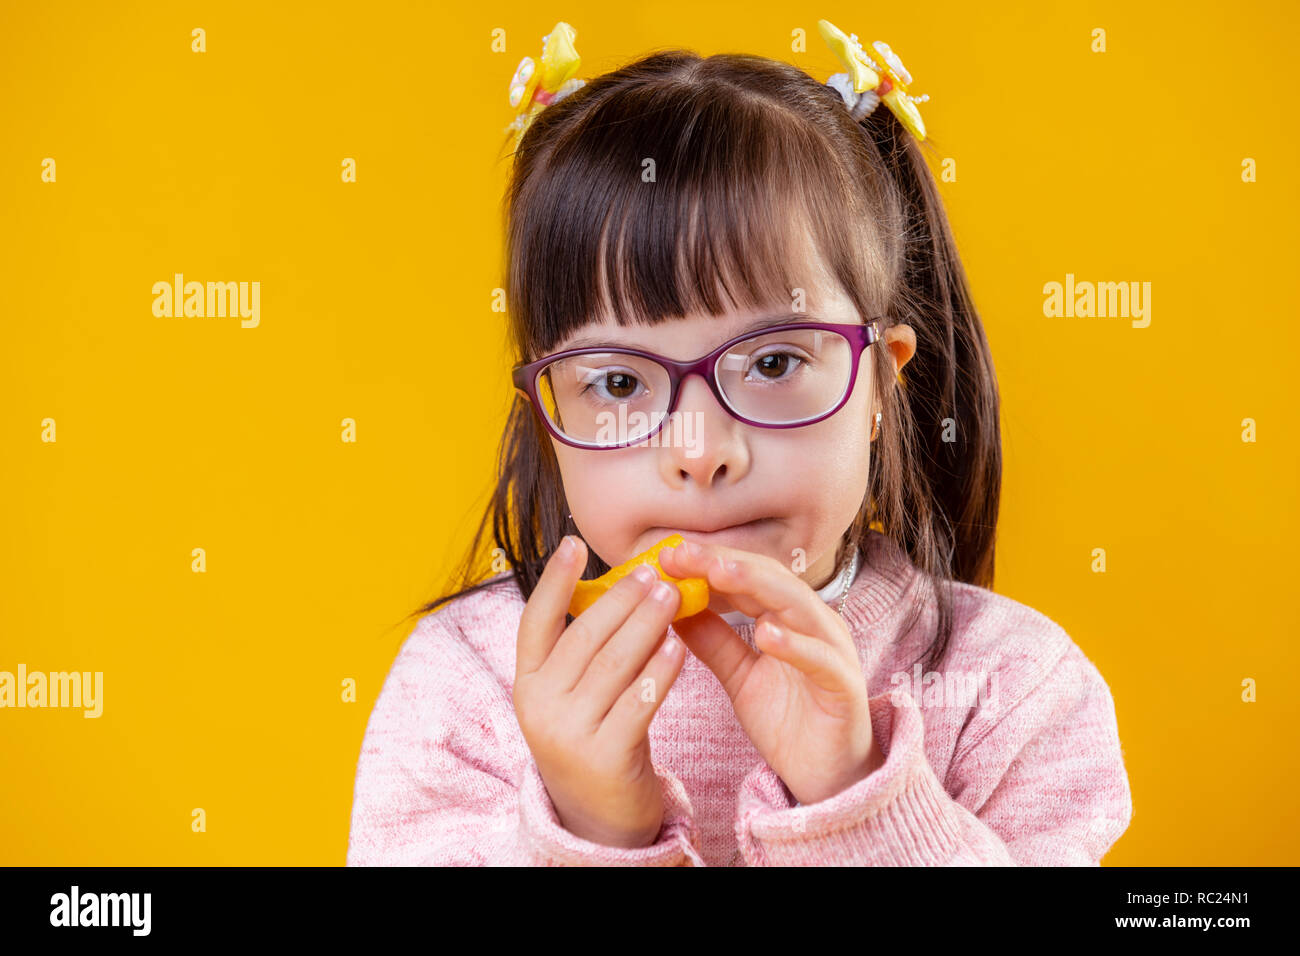 Short-haired unusual child with big brown eyes eating unhealthy snacks Stock Photo